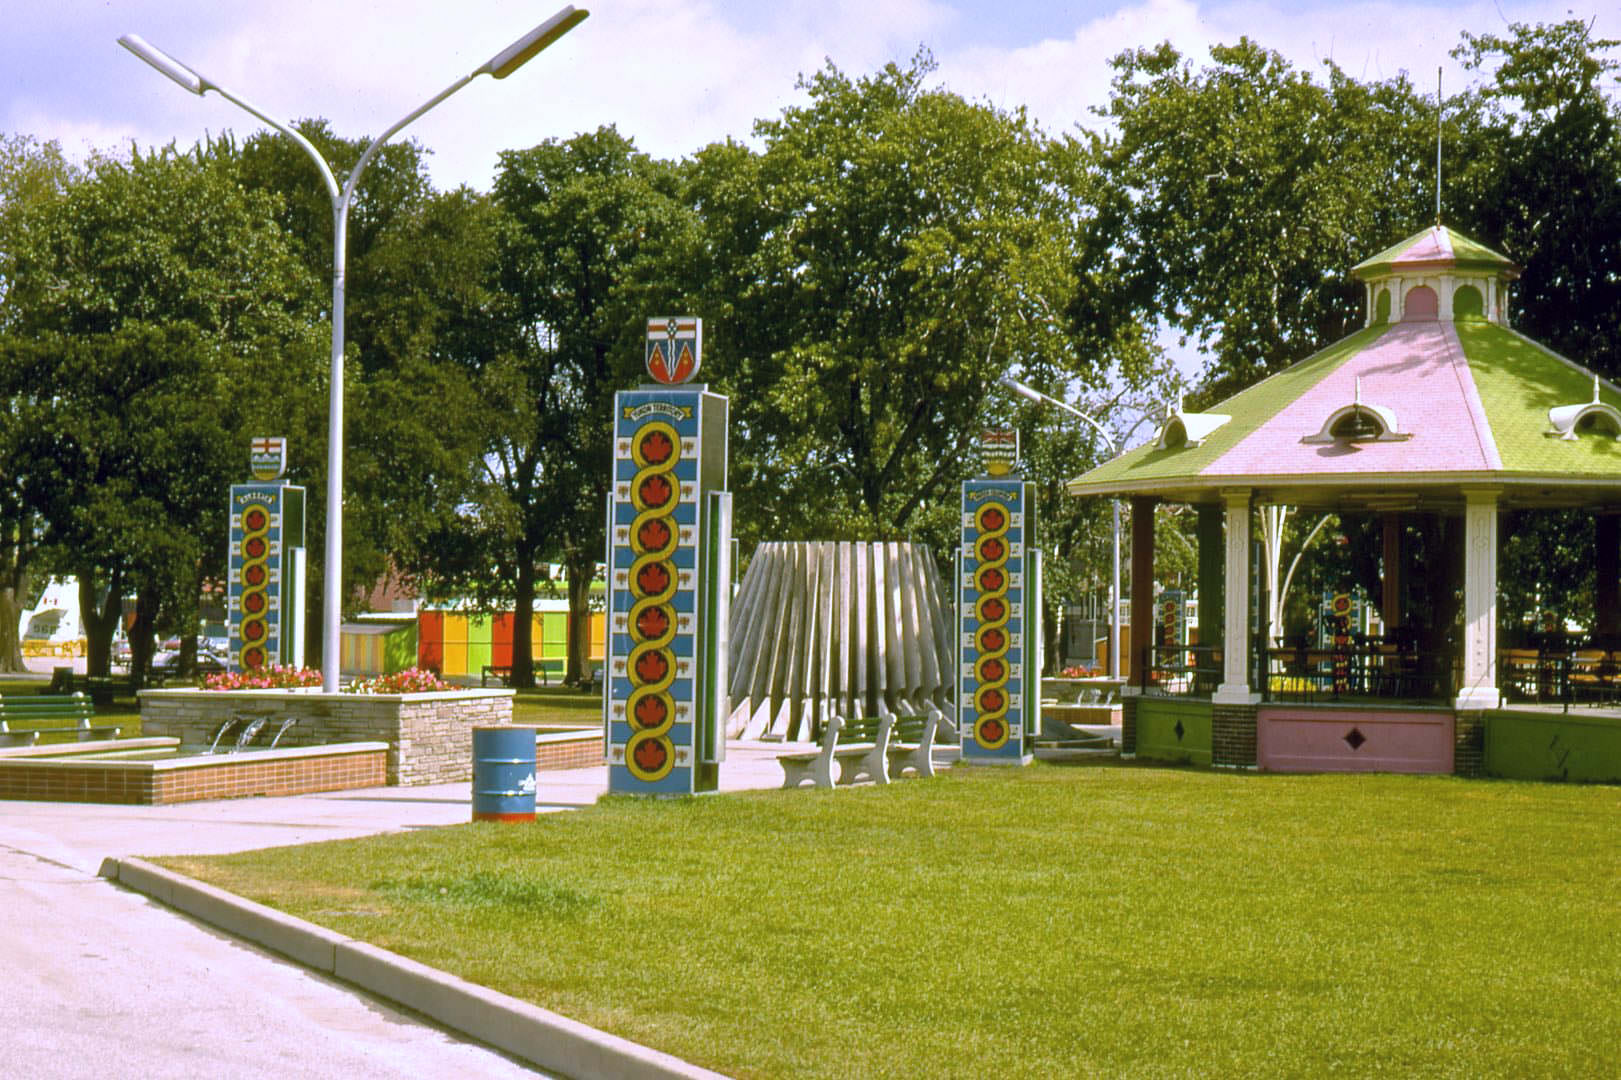 CNE grounds, start of a pathway leading to the Dufferin Gates, 1968